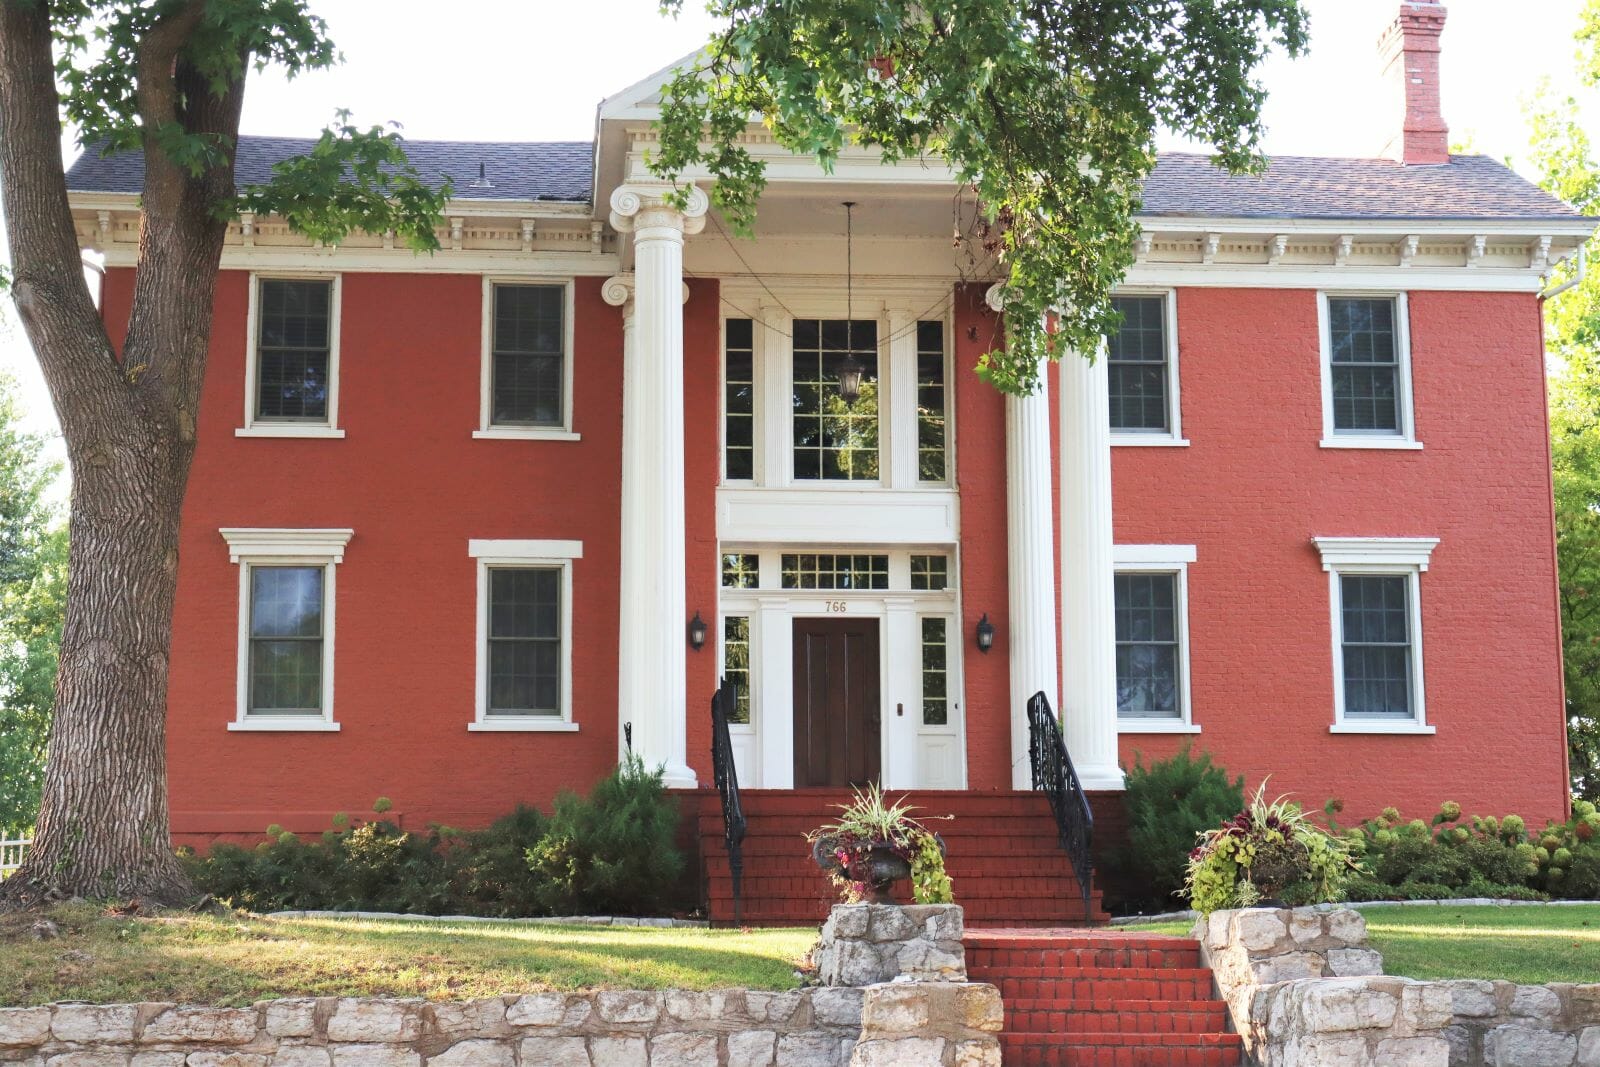 a large painted red brick home with white columns, windows and detailing. The home features ornate iron railing on the stairs leading up to the front door.